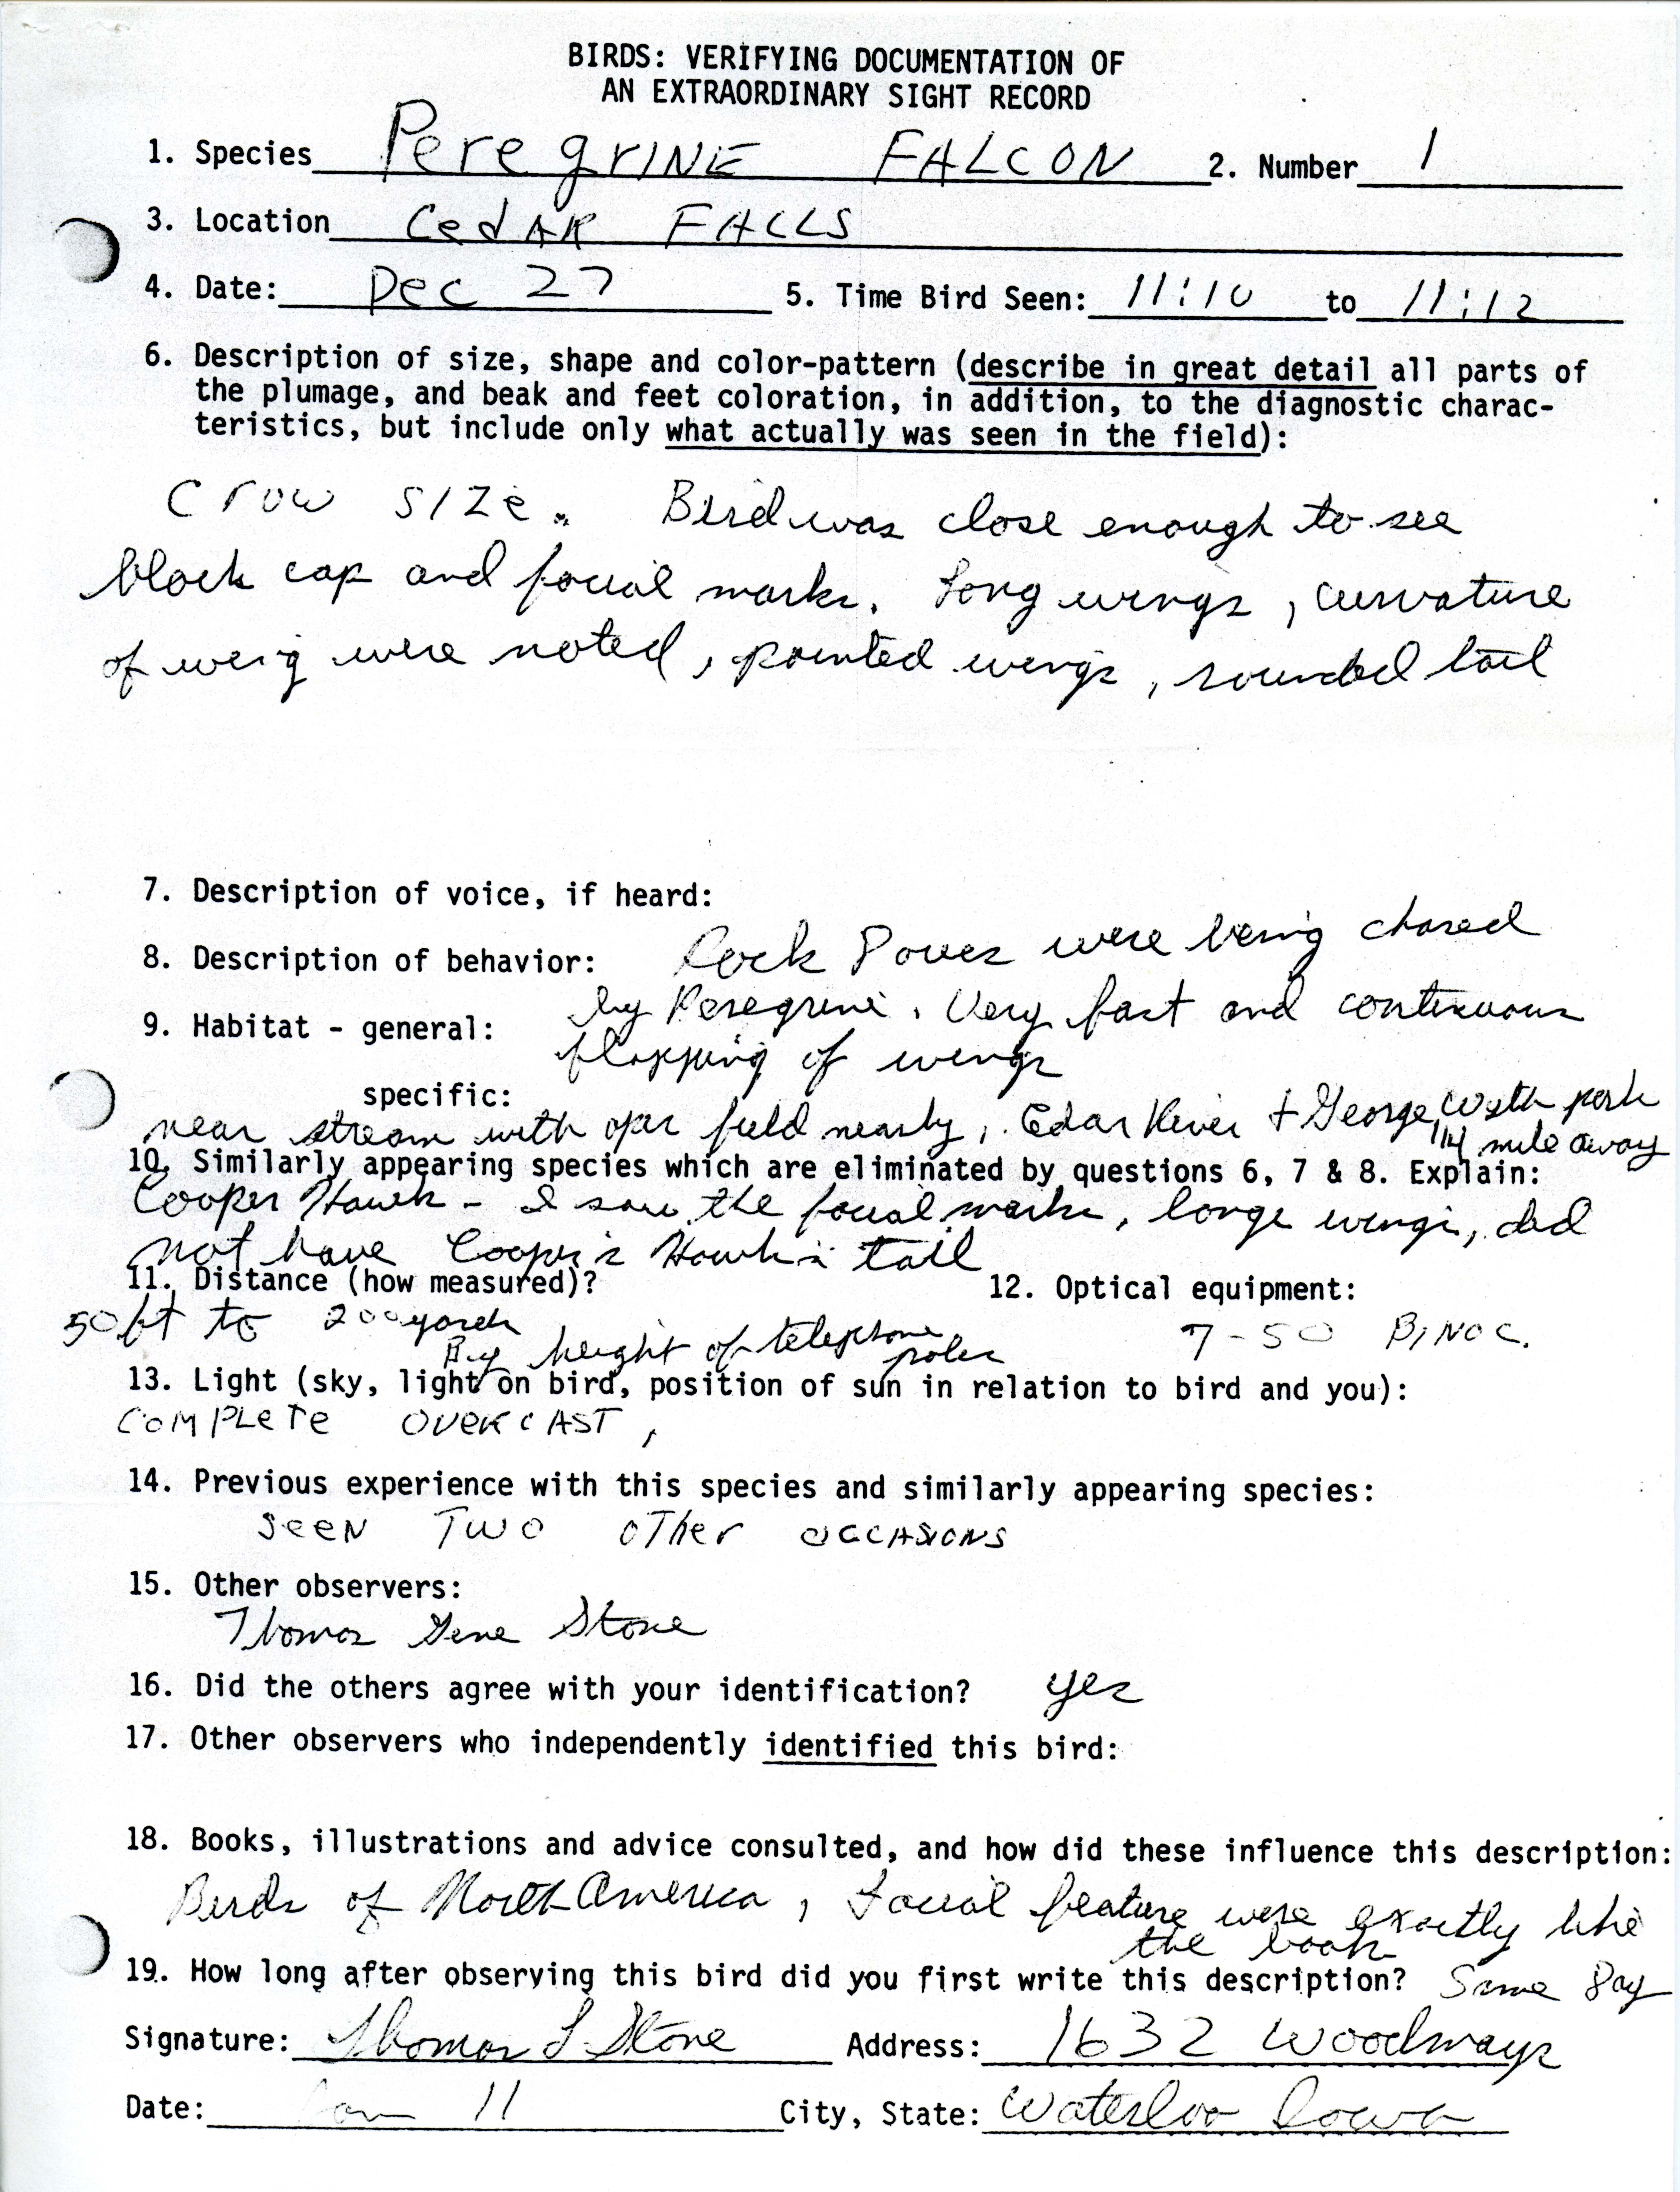 Verifying documentation form for Peregrine Falcon sighting submitted by Thomas Stone, December 27 1980